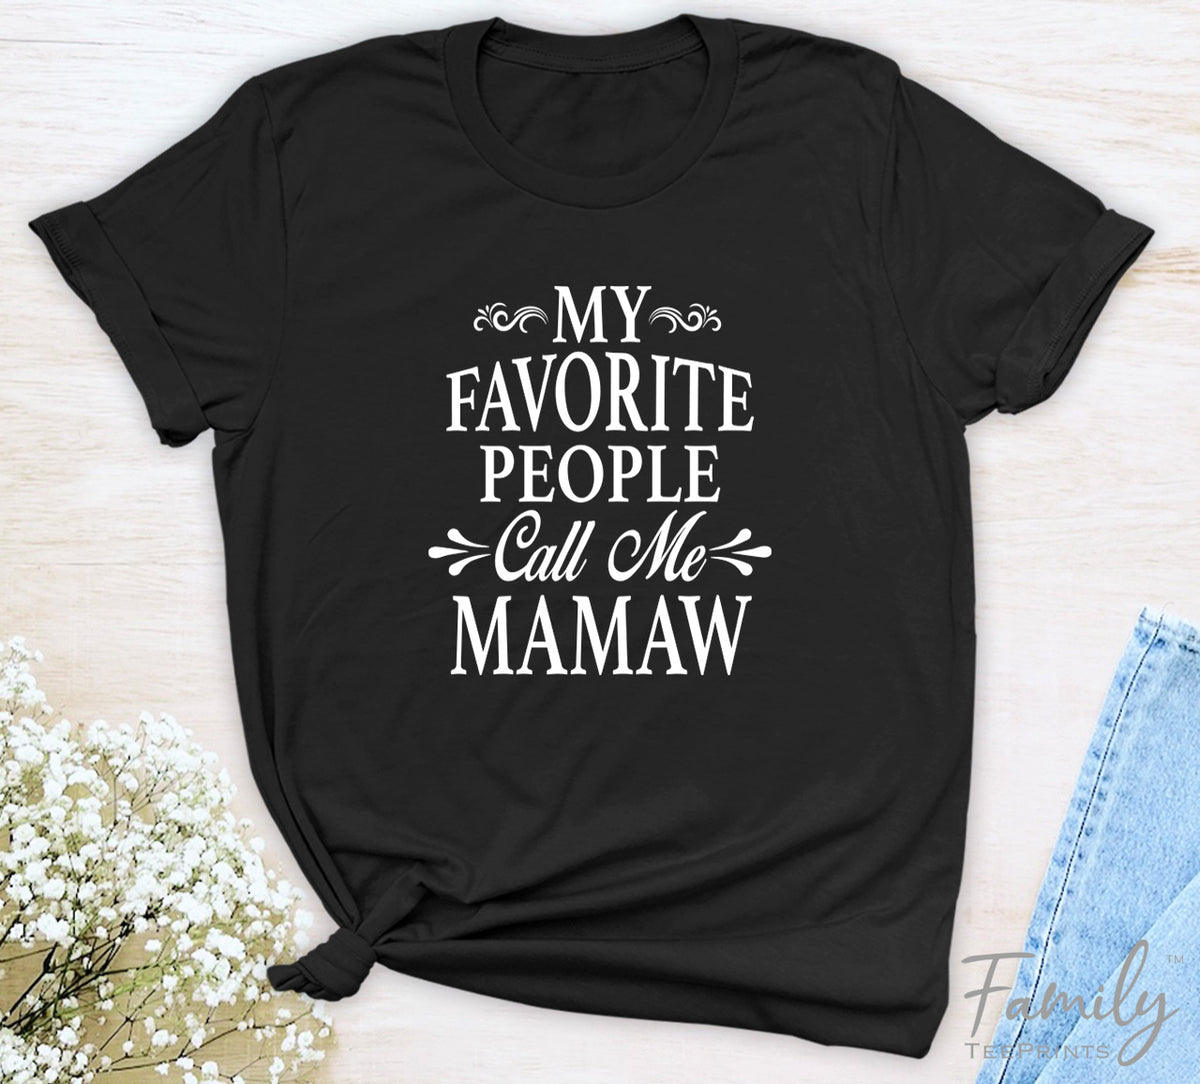 My Favorite People Call Me Mamaw - Unisex T-shirt - Mamaw Shirt - Gift For Mamaw